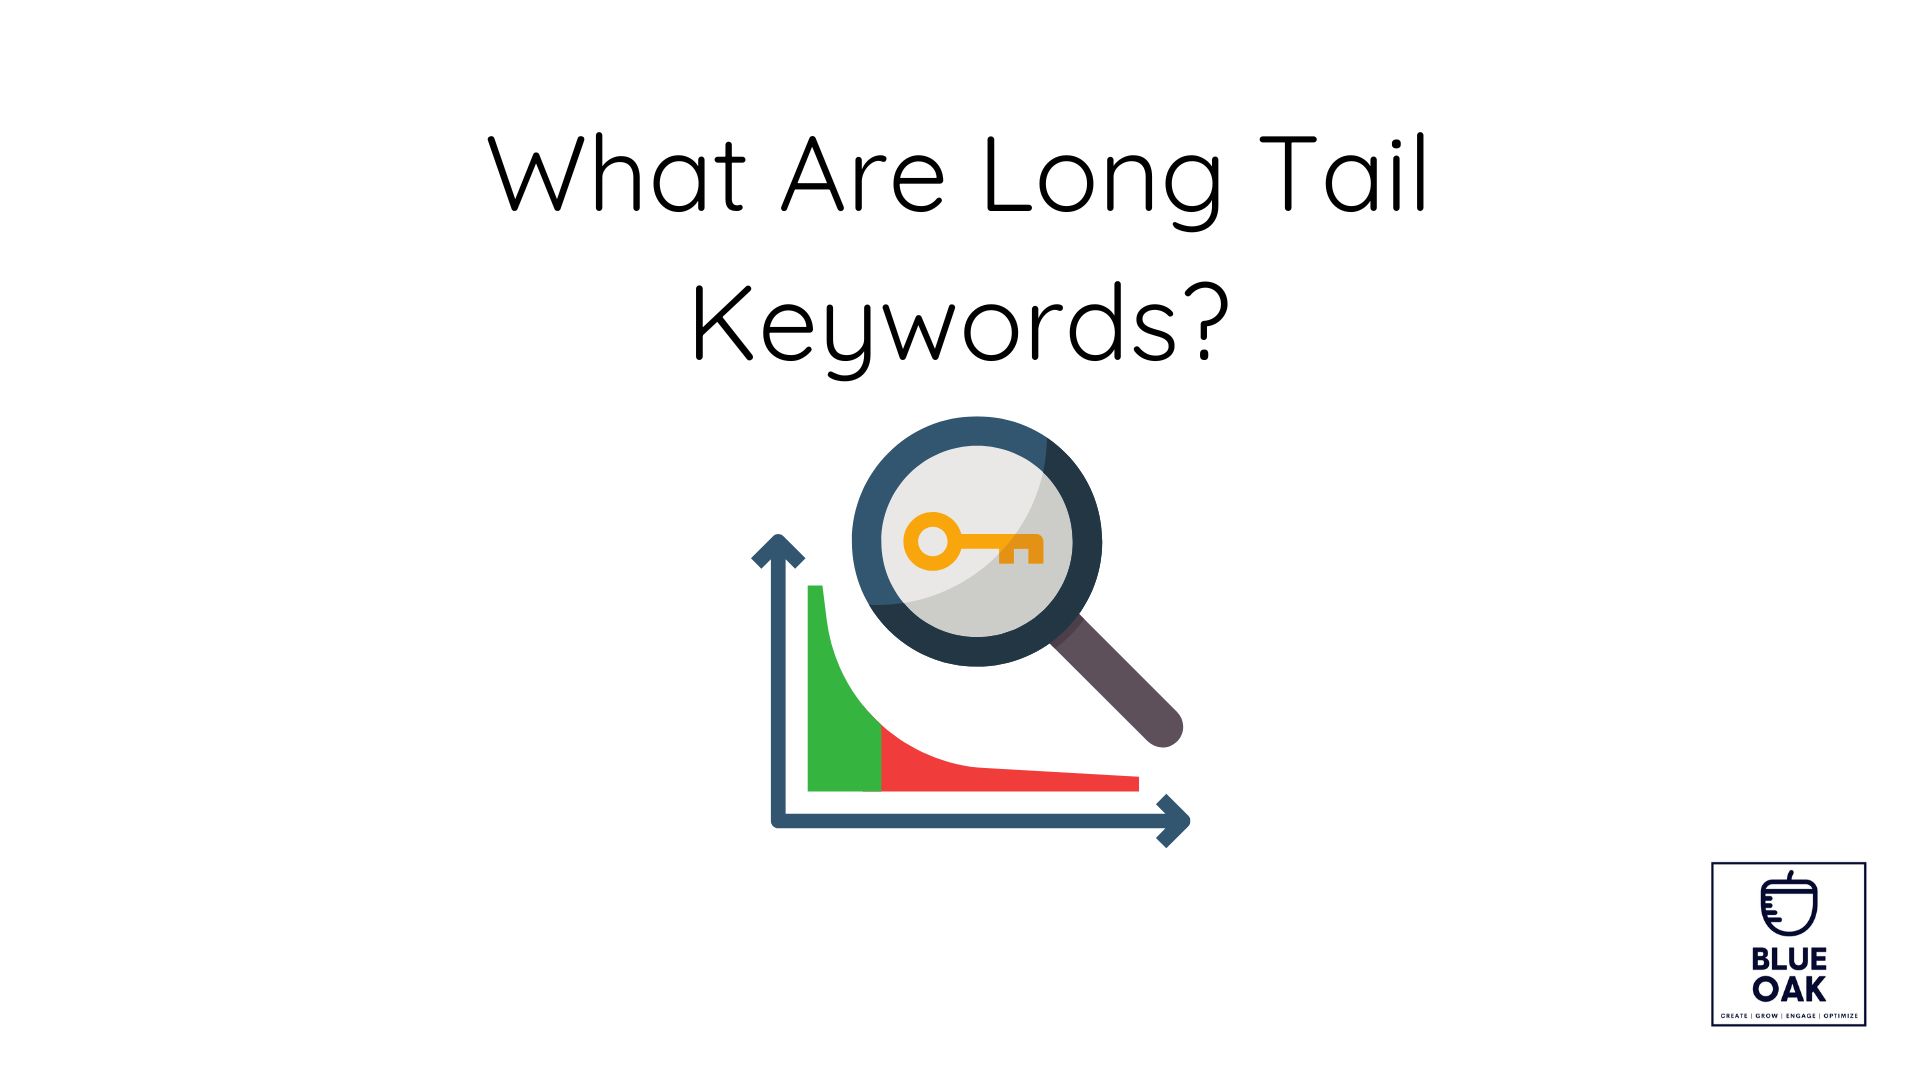 What Are Long Tail Keywords?